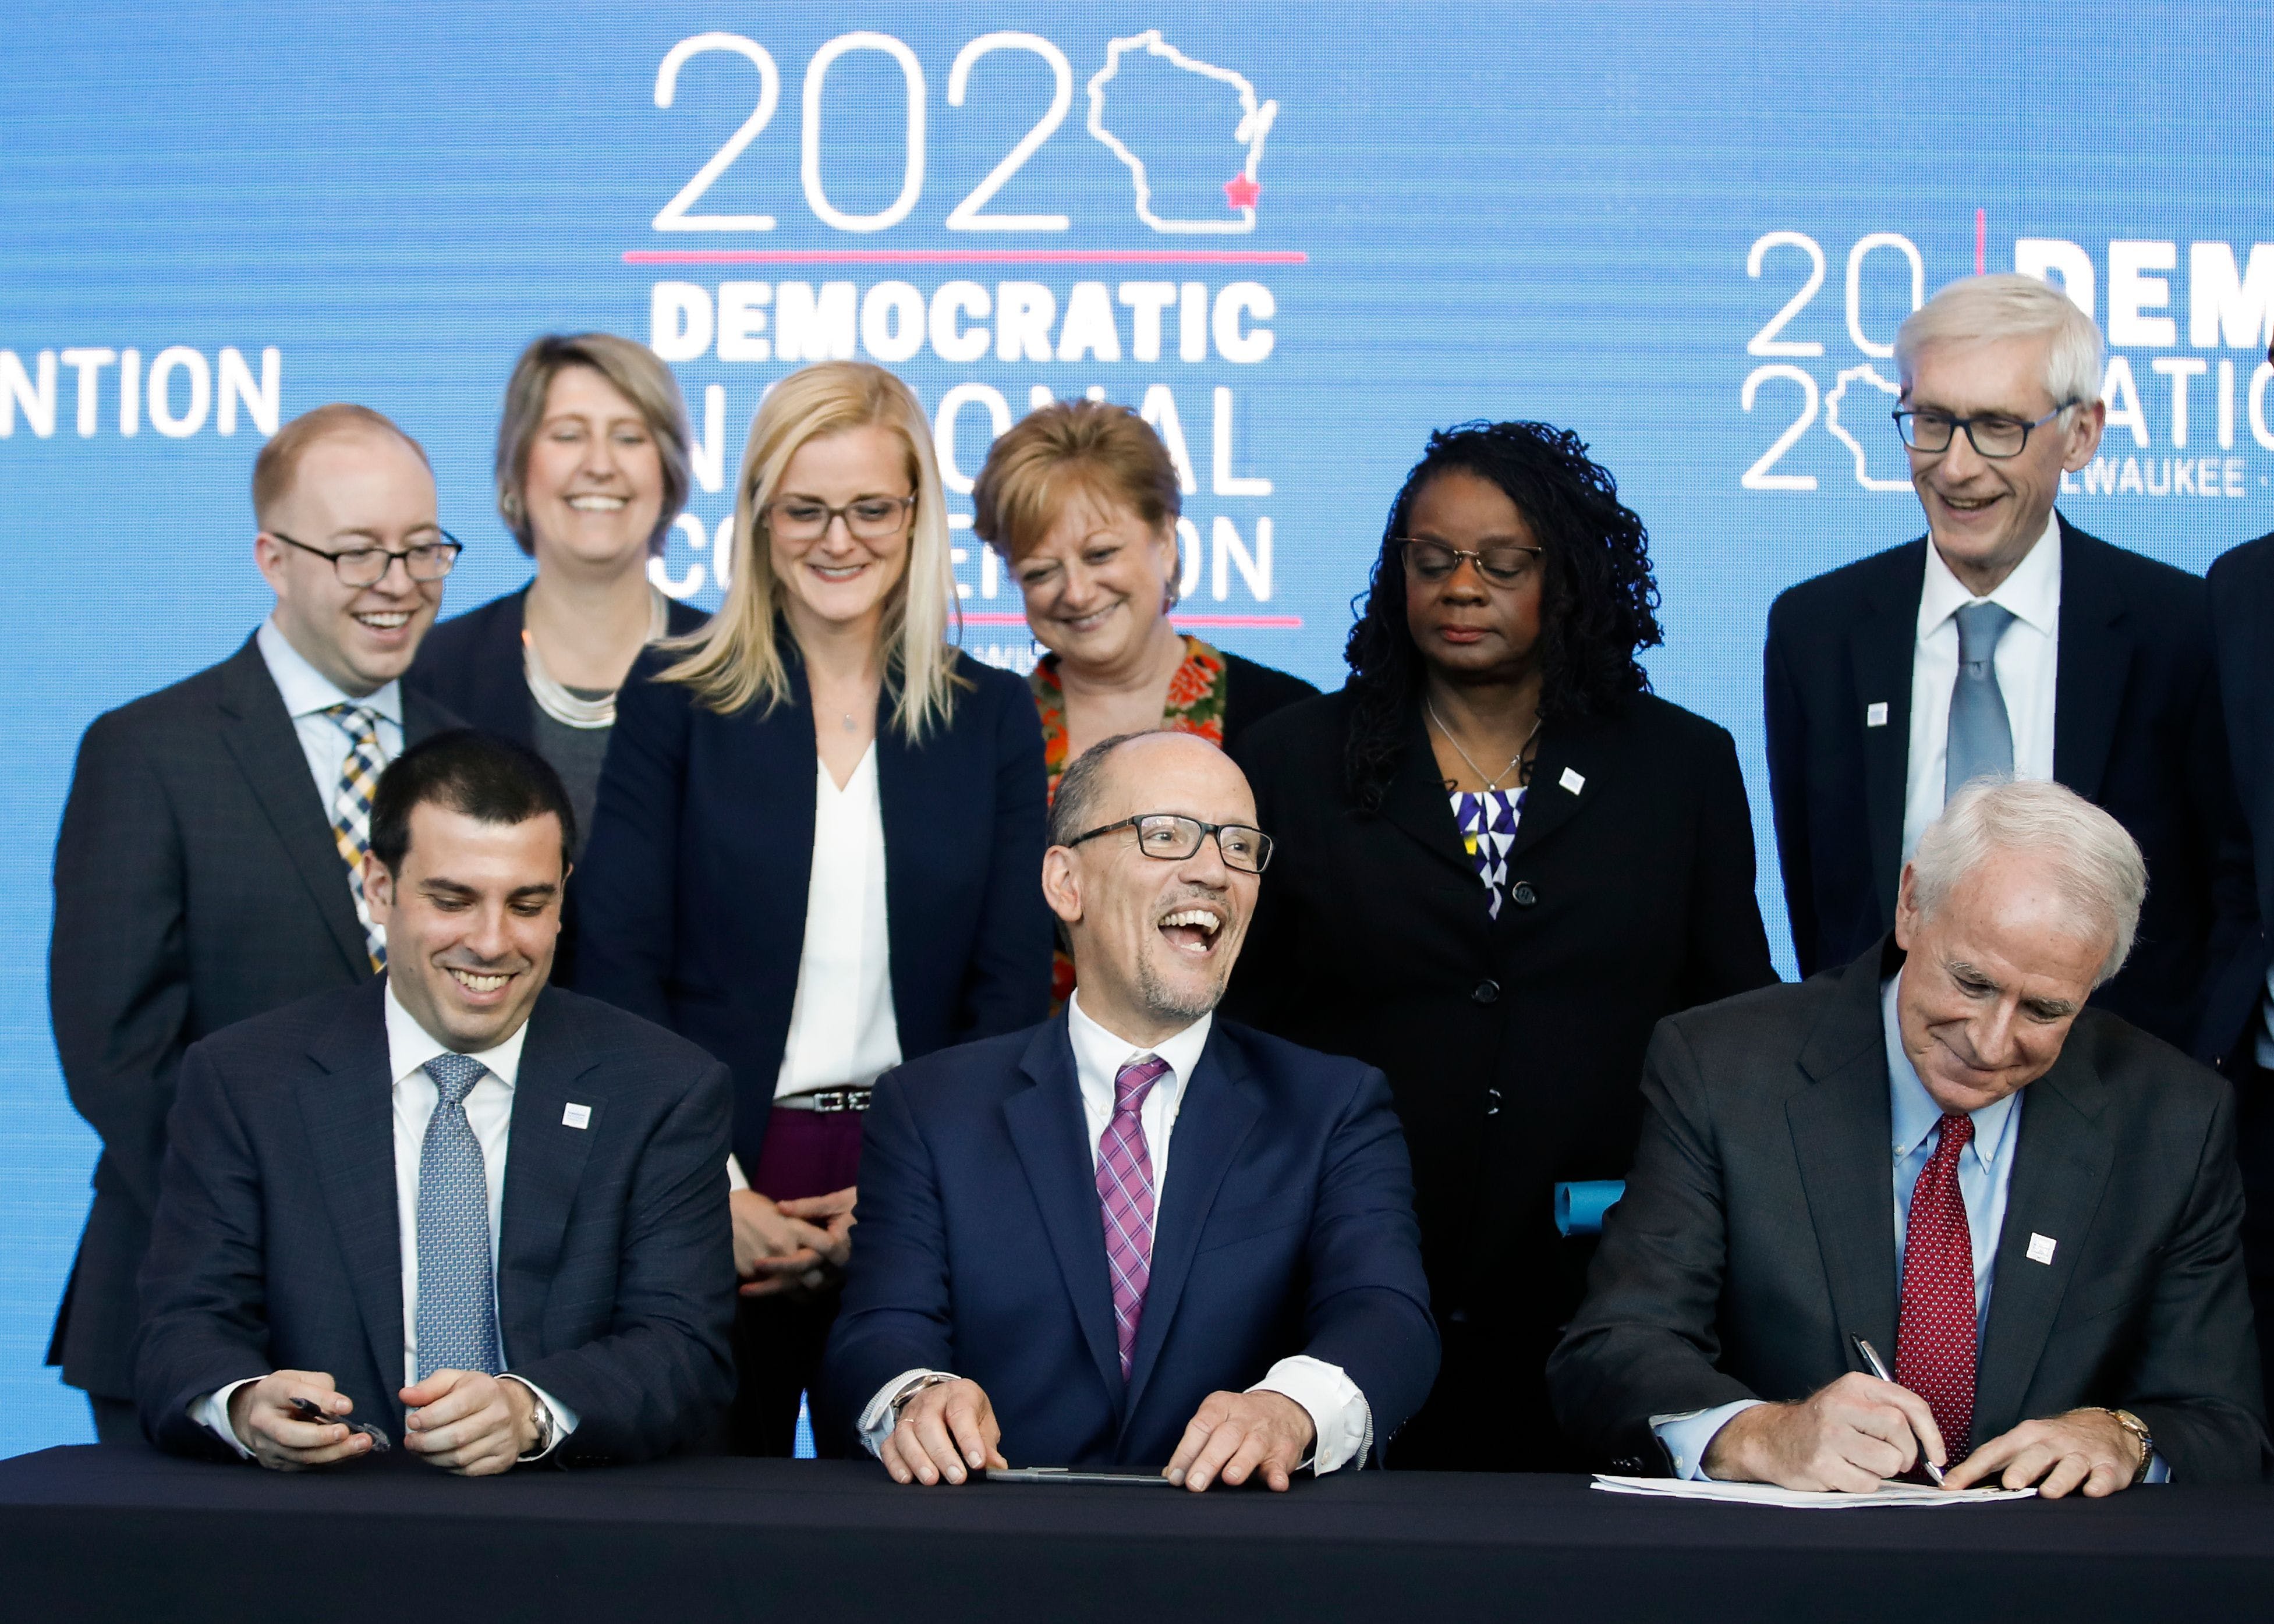 Milwaukee Mayor Tom Barrett (bottom R) signs a document announcing the selection of Milwaukee as the 2020 Democratic National Convention host city as Wisconsin Governor Tony Evers (R) and Chair of the Democratic National Committee Tom Perez (bottom C) look on during a press conference at the Fiserv Forum in Milwaukee, Wisconsin on March 11, 2019. - Democrats have chosen Milwaukee as the site of their 2020 election convention, in an effort to win back swing voters in the American "Rust Belt" who helped elect Donald Trump. In announcing the decision, the Democratic Party emphasized it is the first time a Midwestern city other than Chicago has been chosen to host a party convention in more than 100 years. (Photo by Kamil Krzaczynski / AFP)        (Photo credit should read KAMIL KRZACZYNSKI/AFP/Getty Images)